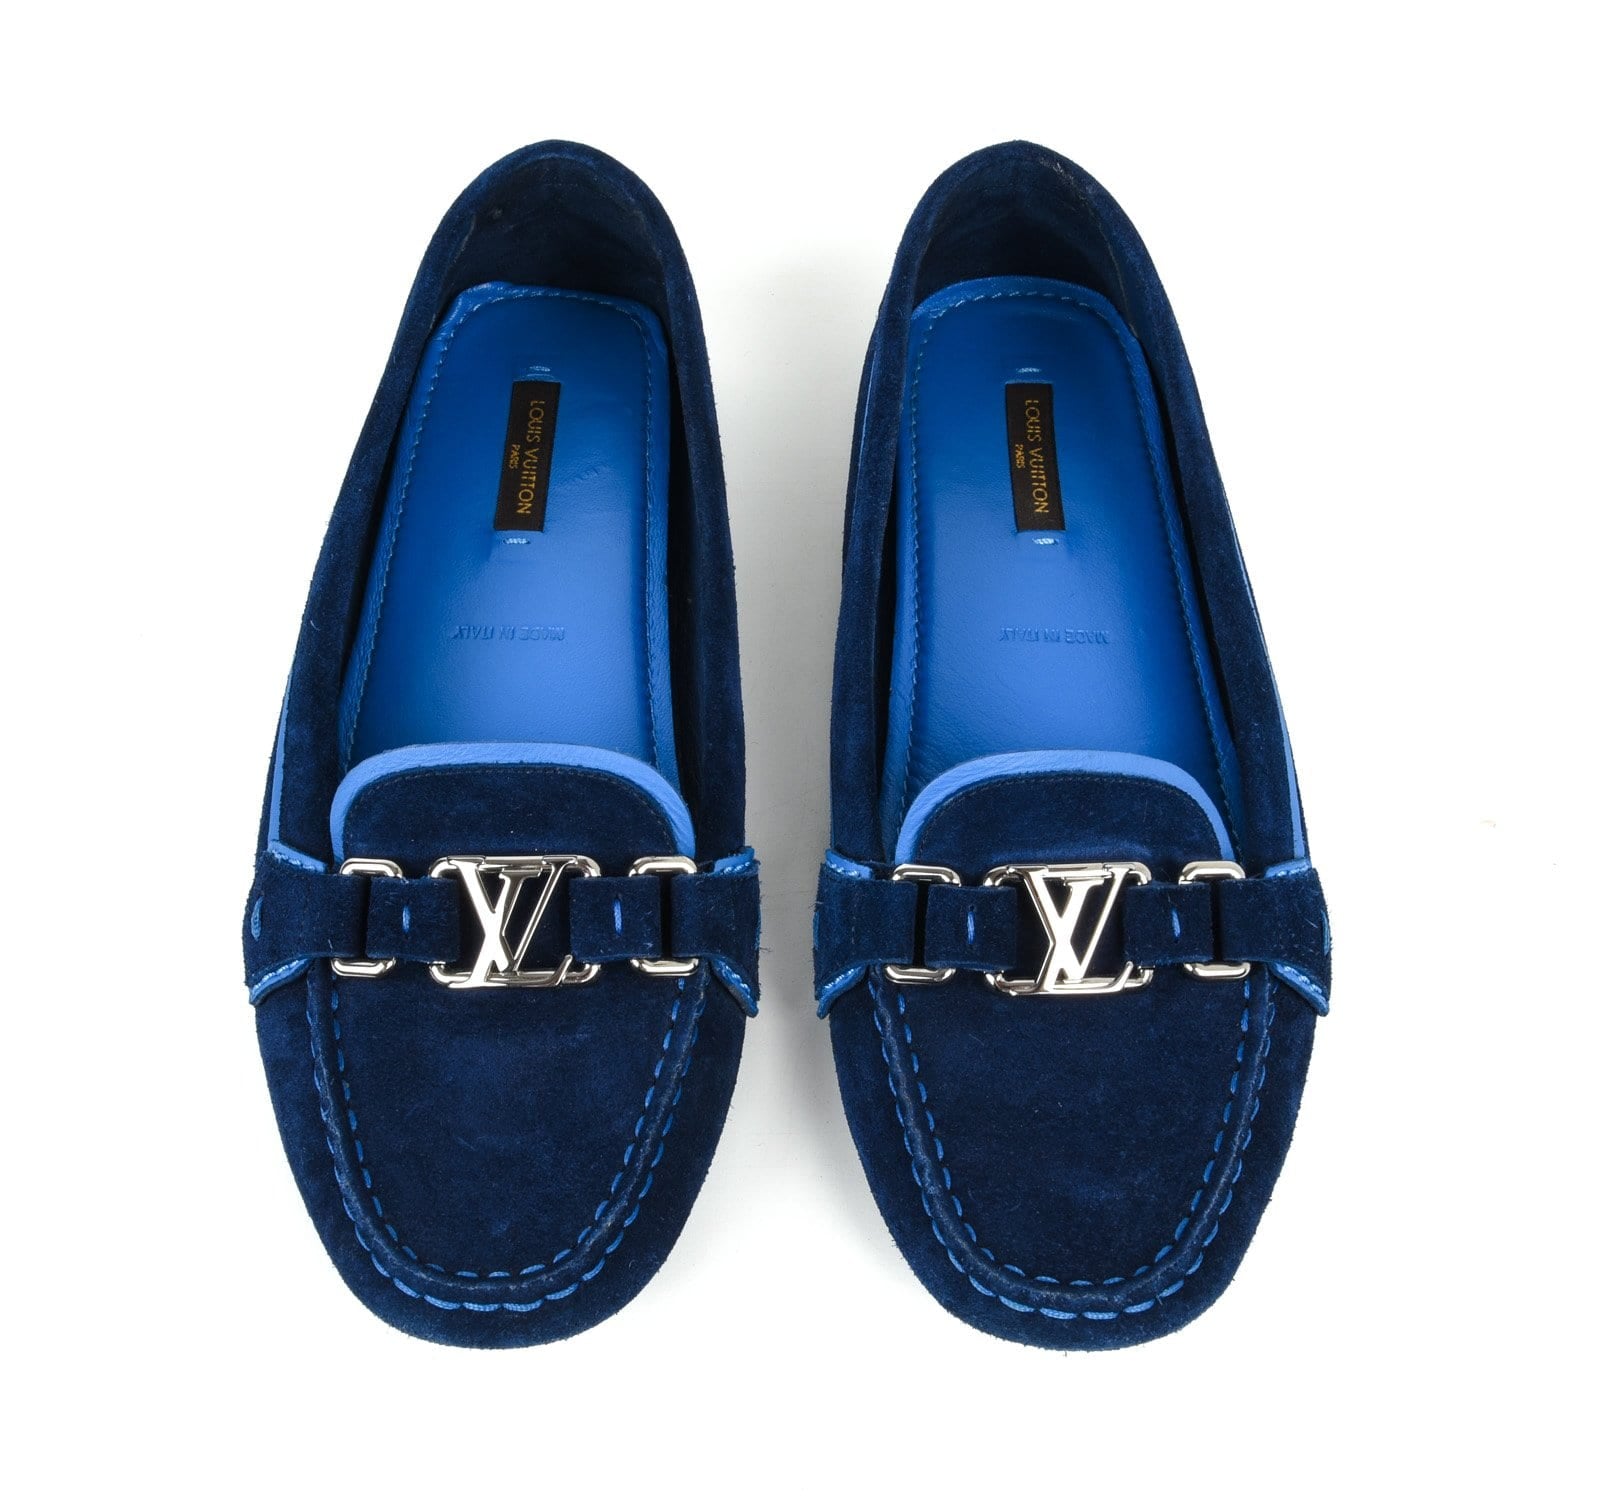 Louis Vuitton Shoe Navy Suede Loafer / Driving Shoe 38.5 / 8.5 - mightychic